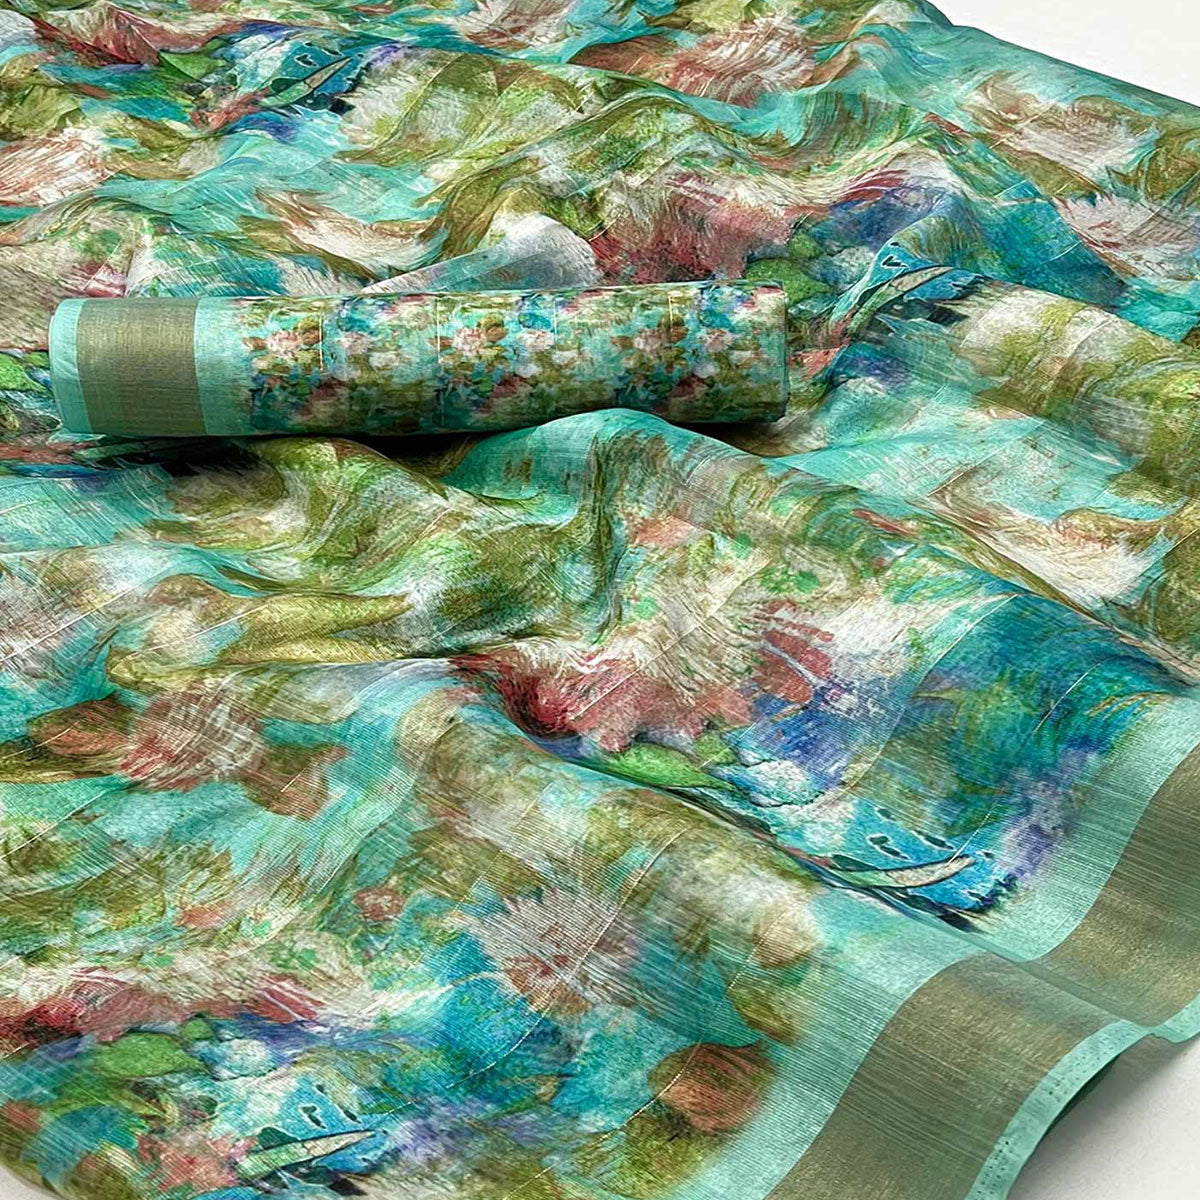 Turquoise Digital Printed Cotton Blend Saree With Jacquard Border